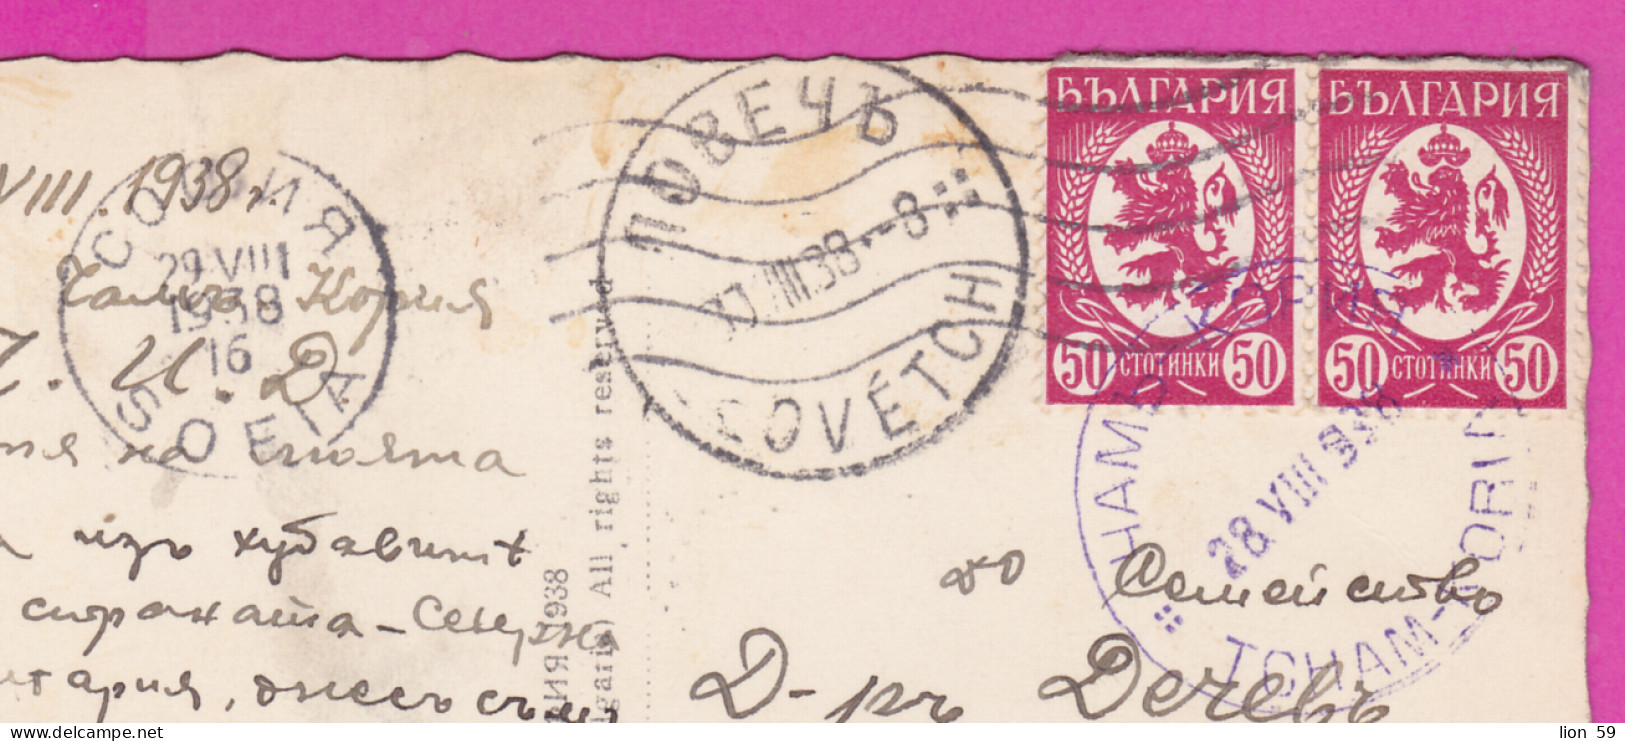 309131 / Bulgaria - Chamkoria (Borovets) - View From The Resort 66 PC 1938 USED 50+50 St. Lion Lowe Sofia - Lovech  - Storia Postale